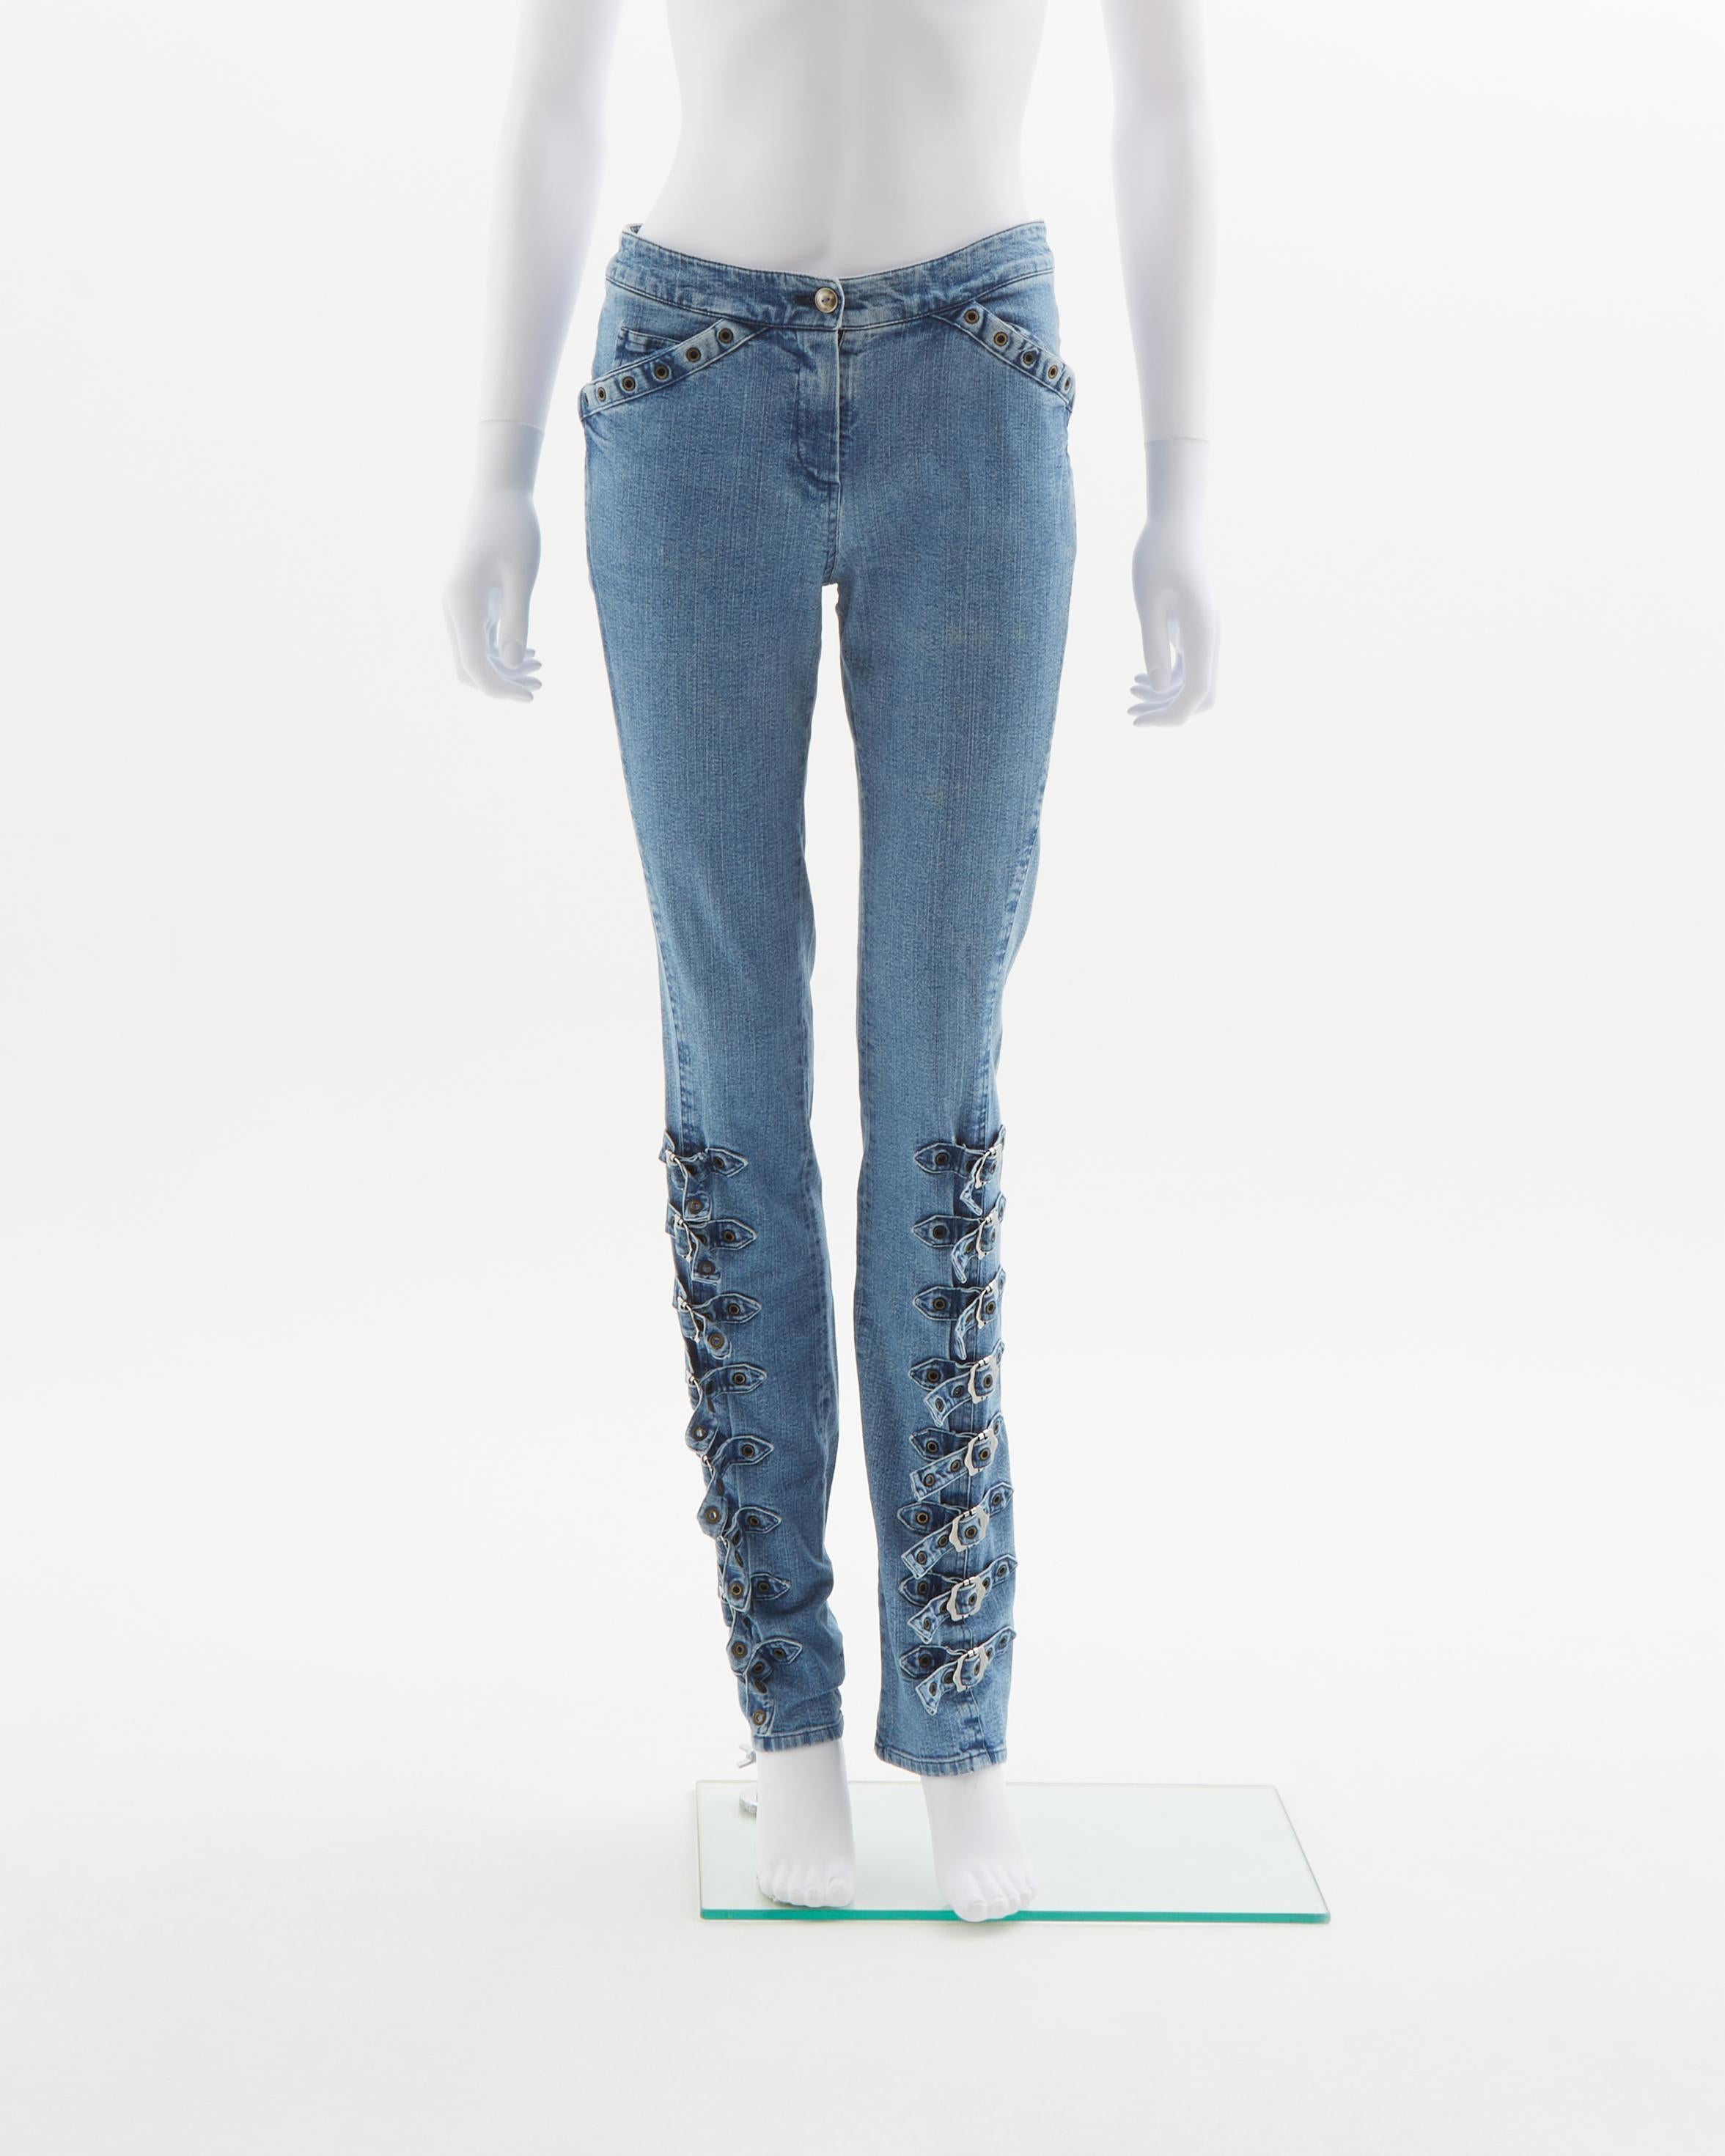 - Designed by John Galliano
- Sold by Skof.Archive
- Ankle Length buckle denim 
- Blue cotton stretch denim 
- Bondage straps with metal grommets and buckles 
- Fall Winter 2003


Size : FR 36 - EN 40 - UK 8 - US 4 (EU)

Materials : Cotton &